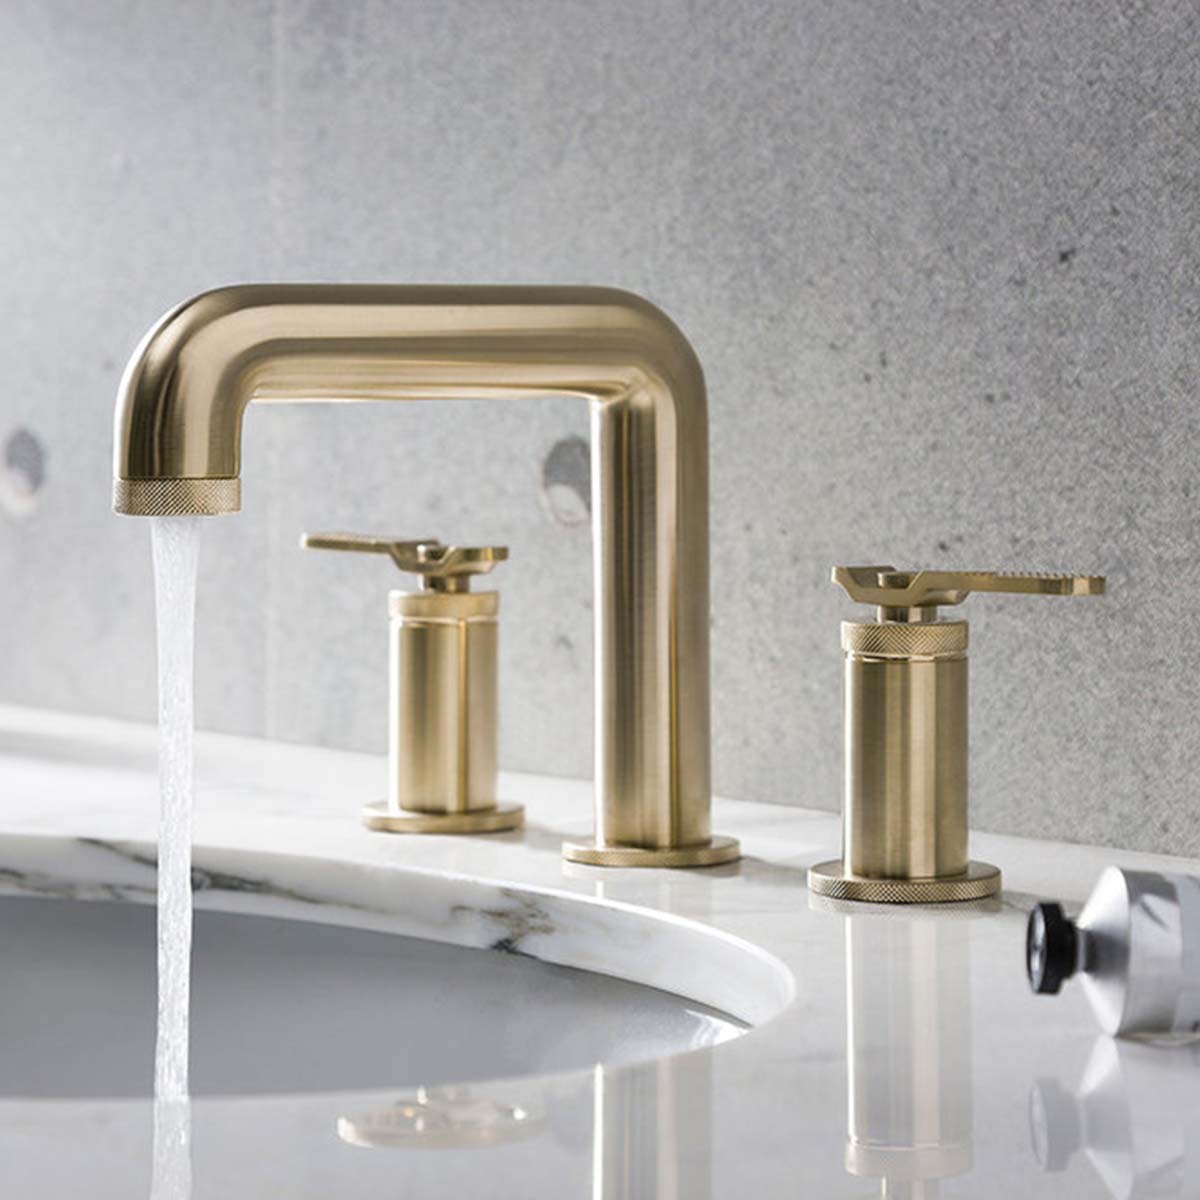 Crosswater Union 3 Hole Basin Mixer Tap With Lever Handles Union Brass Lifestyle